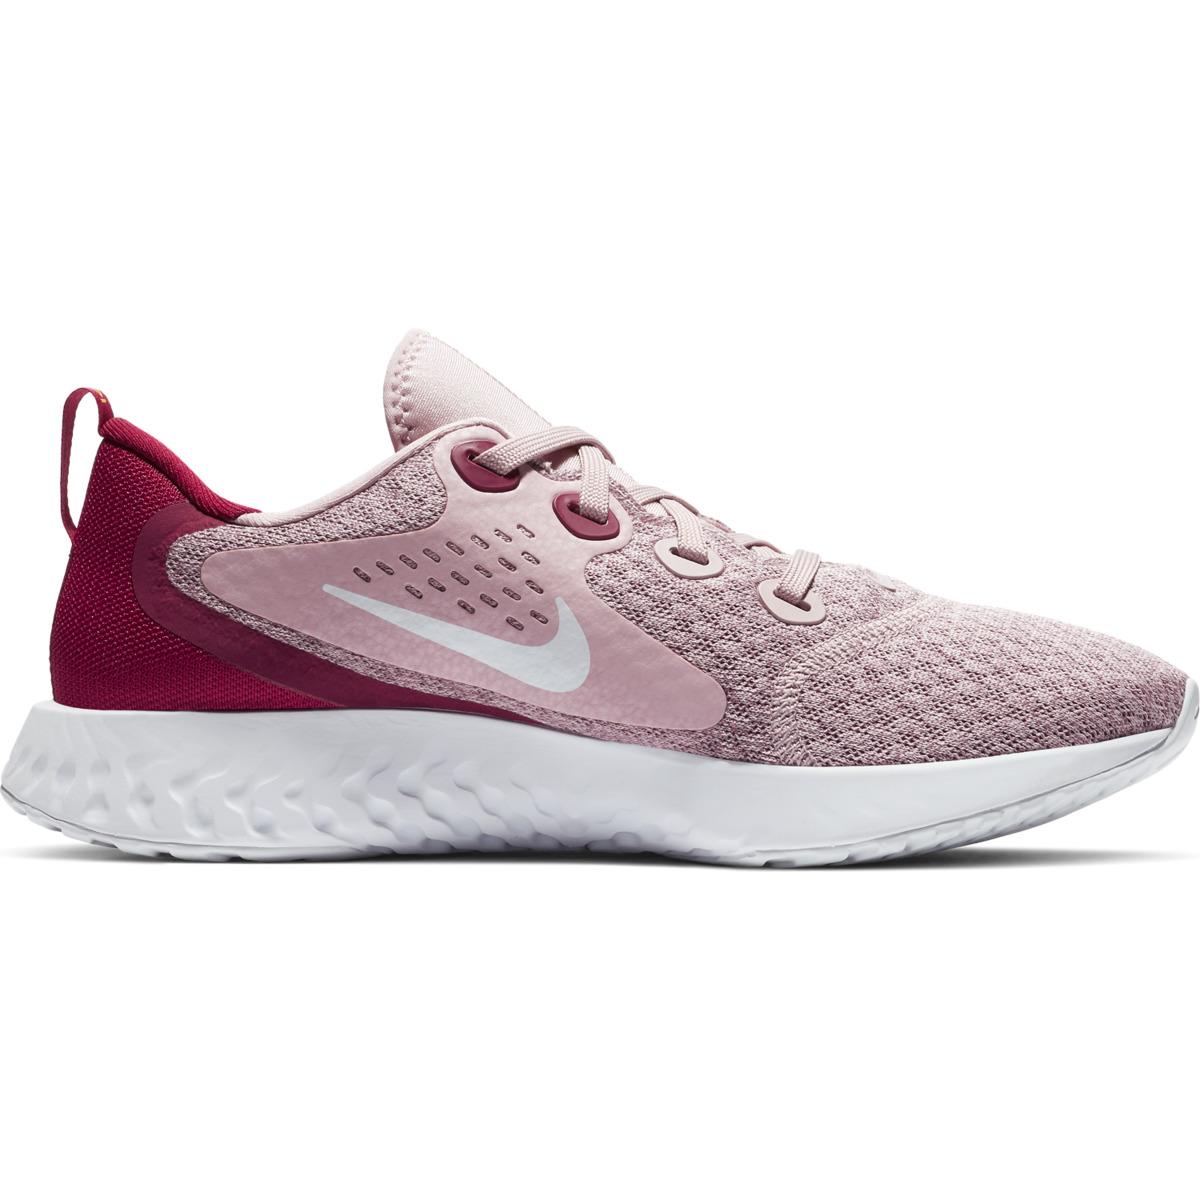 Nike Rubber Legend React Running Shoes in Pink - Lyst